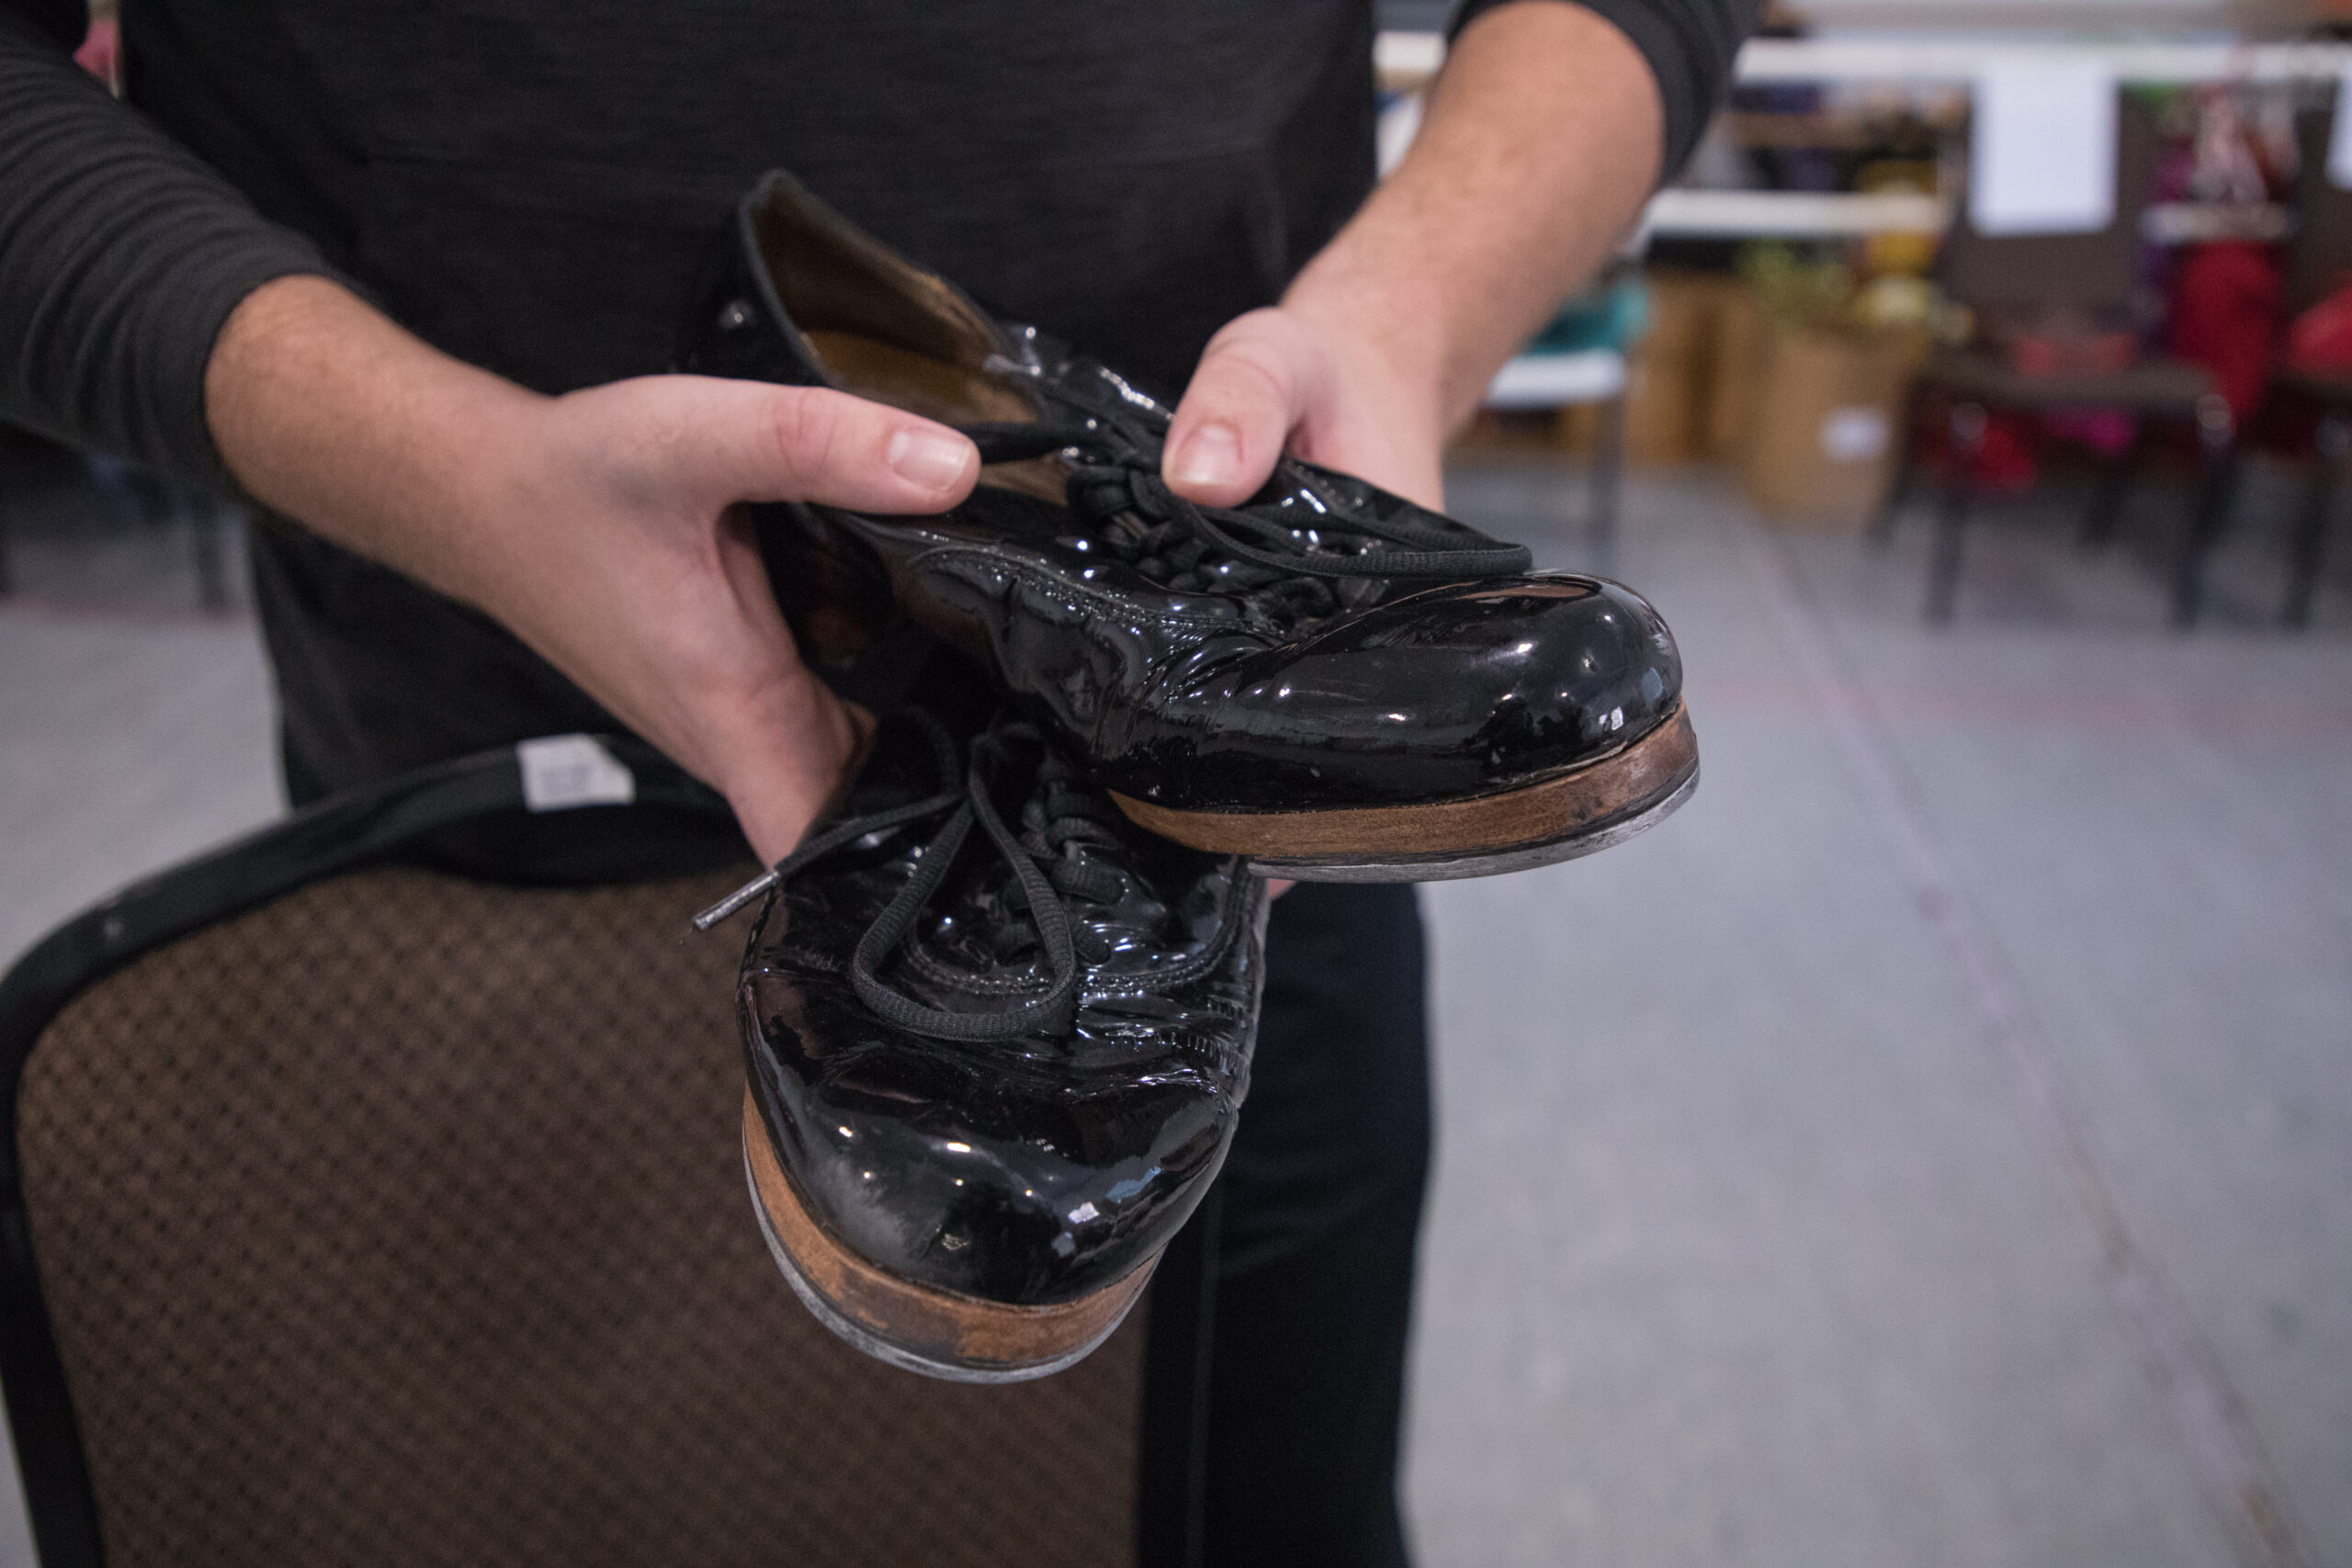 A man holds a pair of shiny black tap shoes. They show scuff marks from constant use.